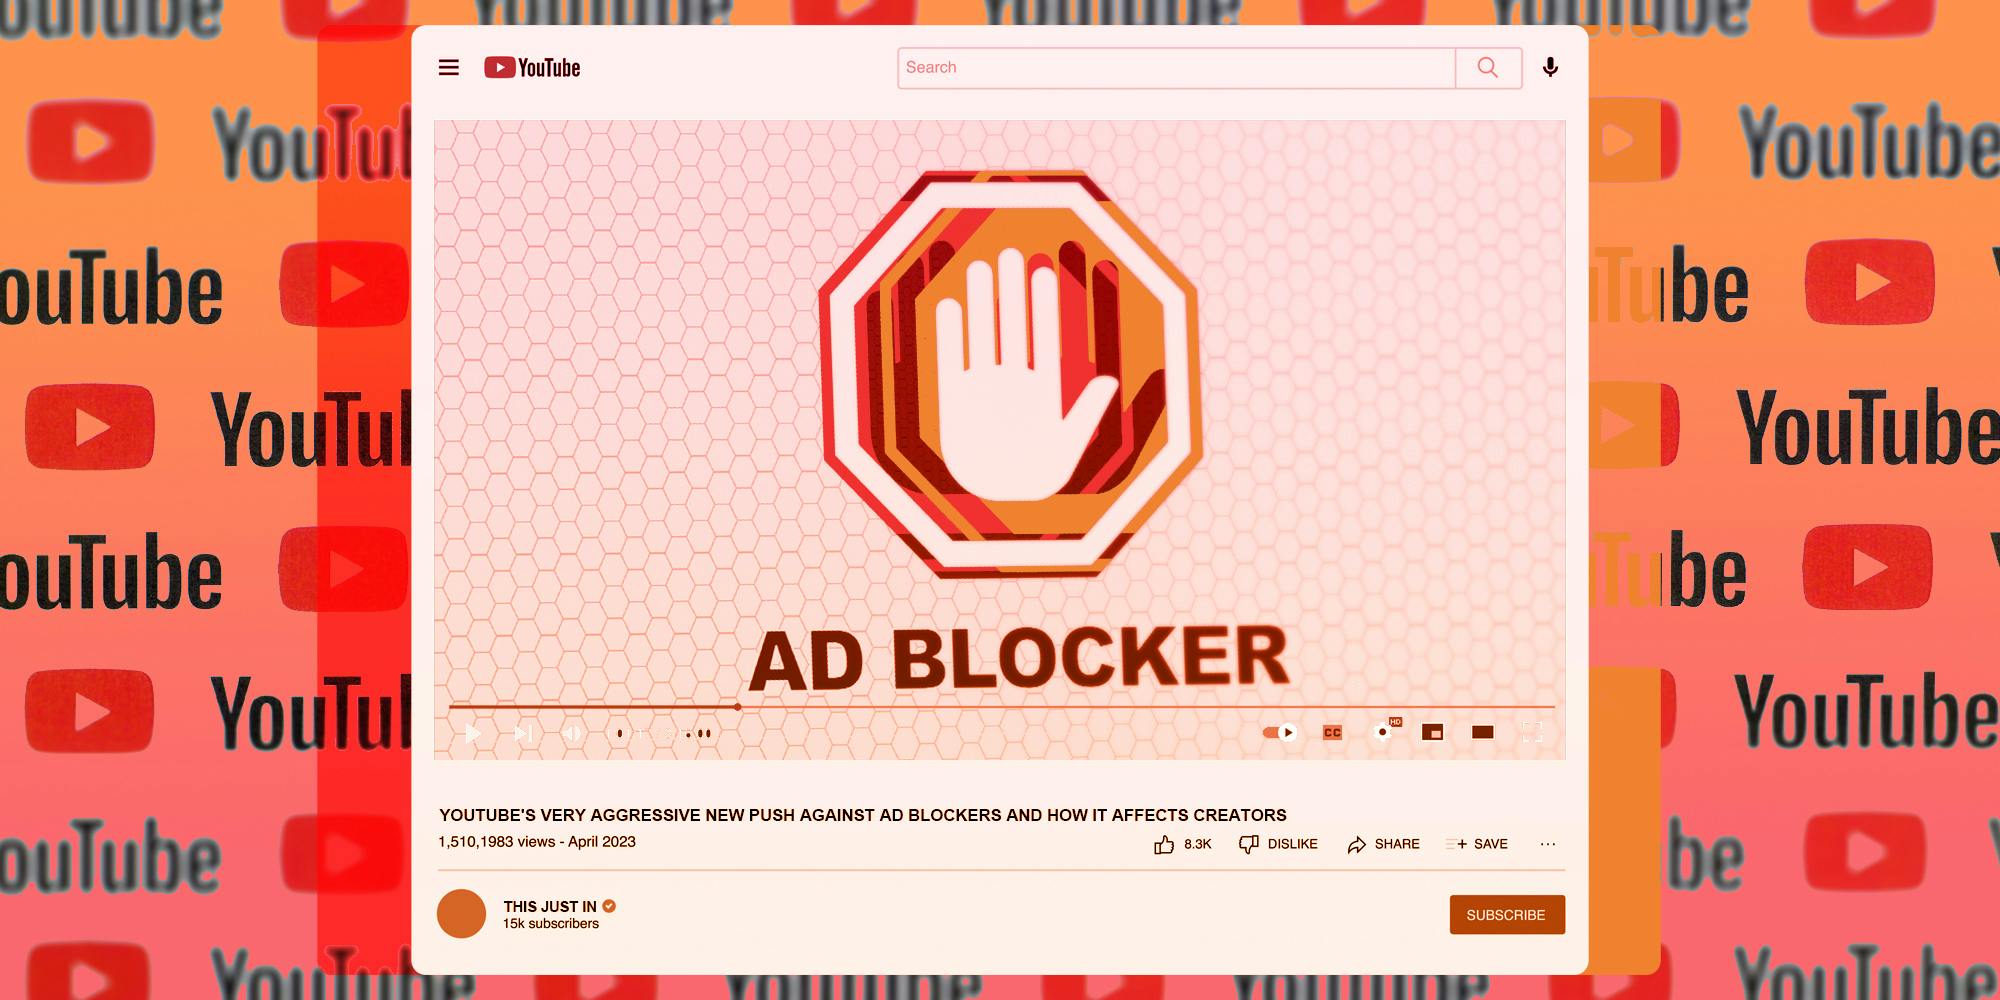 Who are the Winners and Losers in YouTube’s Ad Blocker Crackdown?